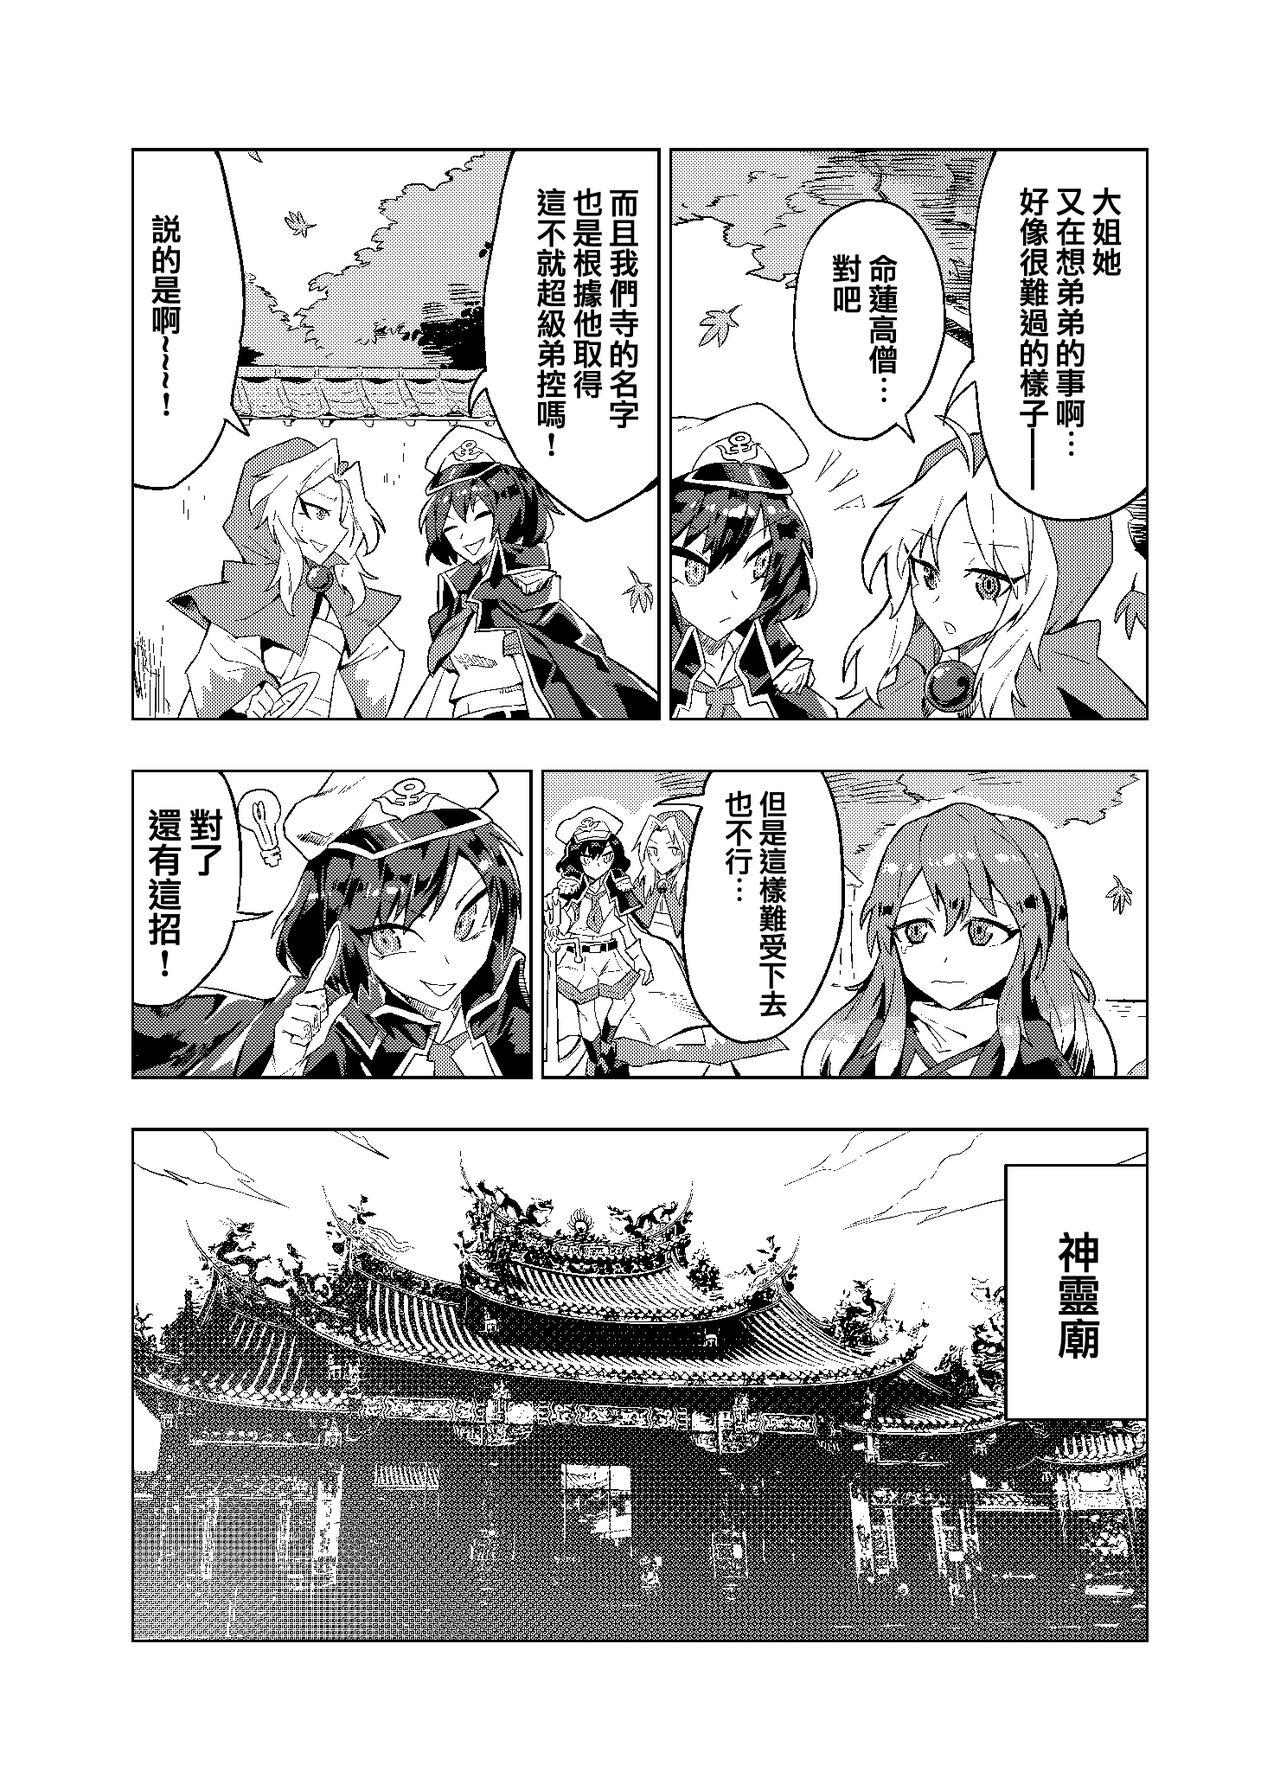 Gaping 弟控圣和换装太子（Touhou Project） - Touhou project Shavedpussy - Page 4